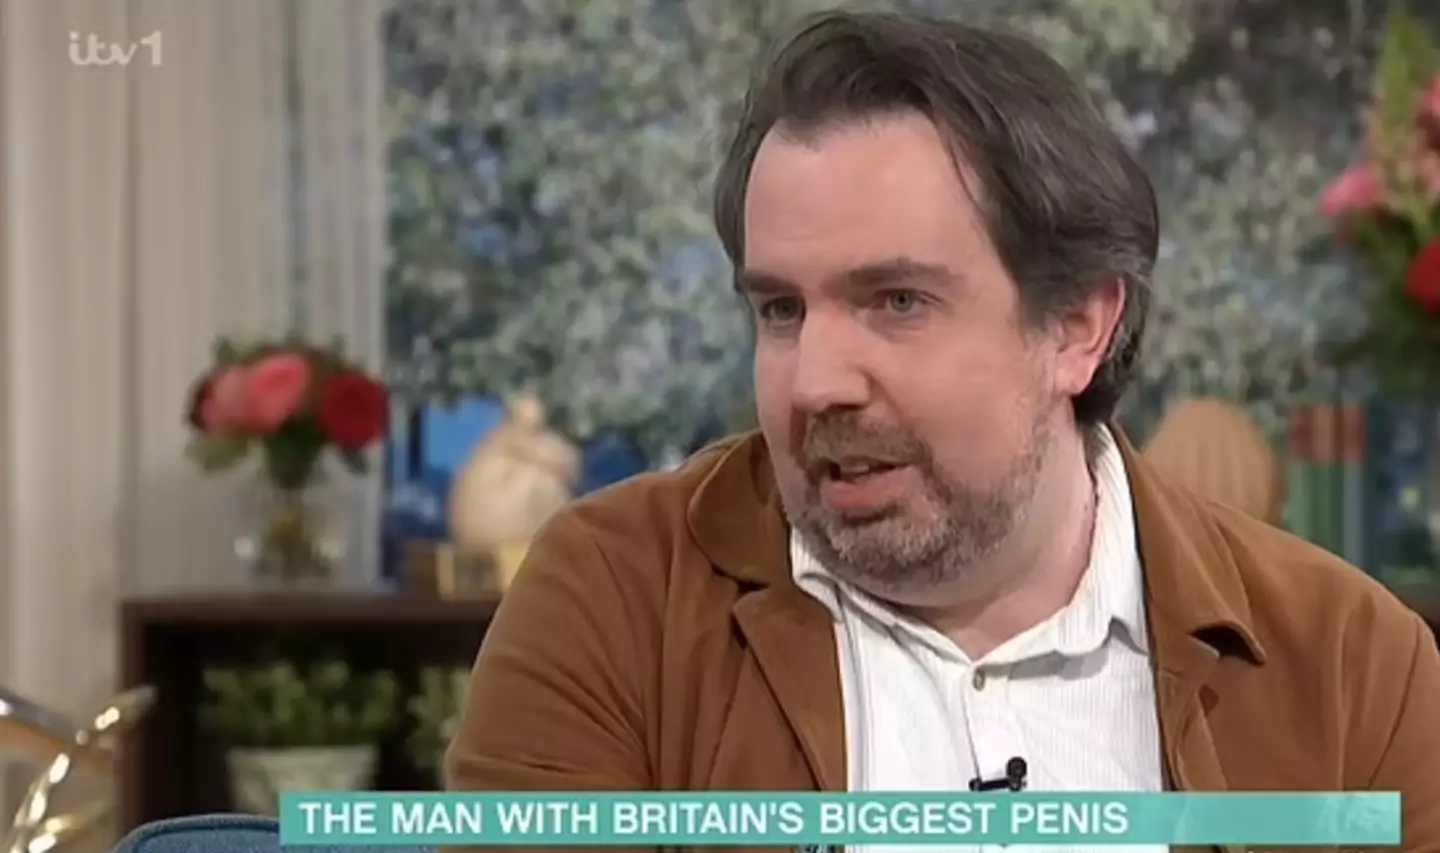 Matt has considered penis reduction surgery, put it costs too much. (ITV)